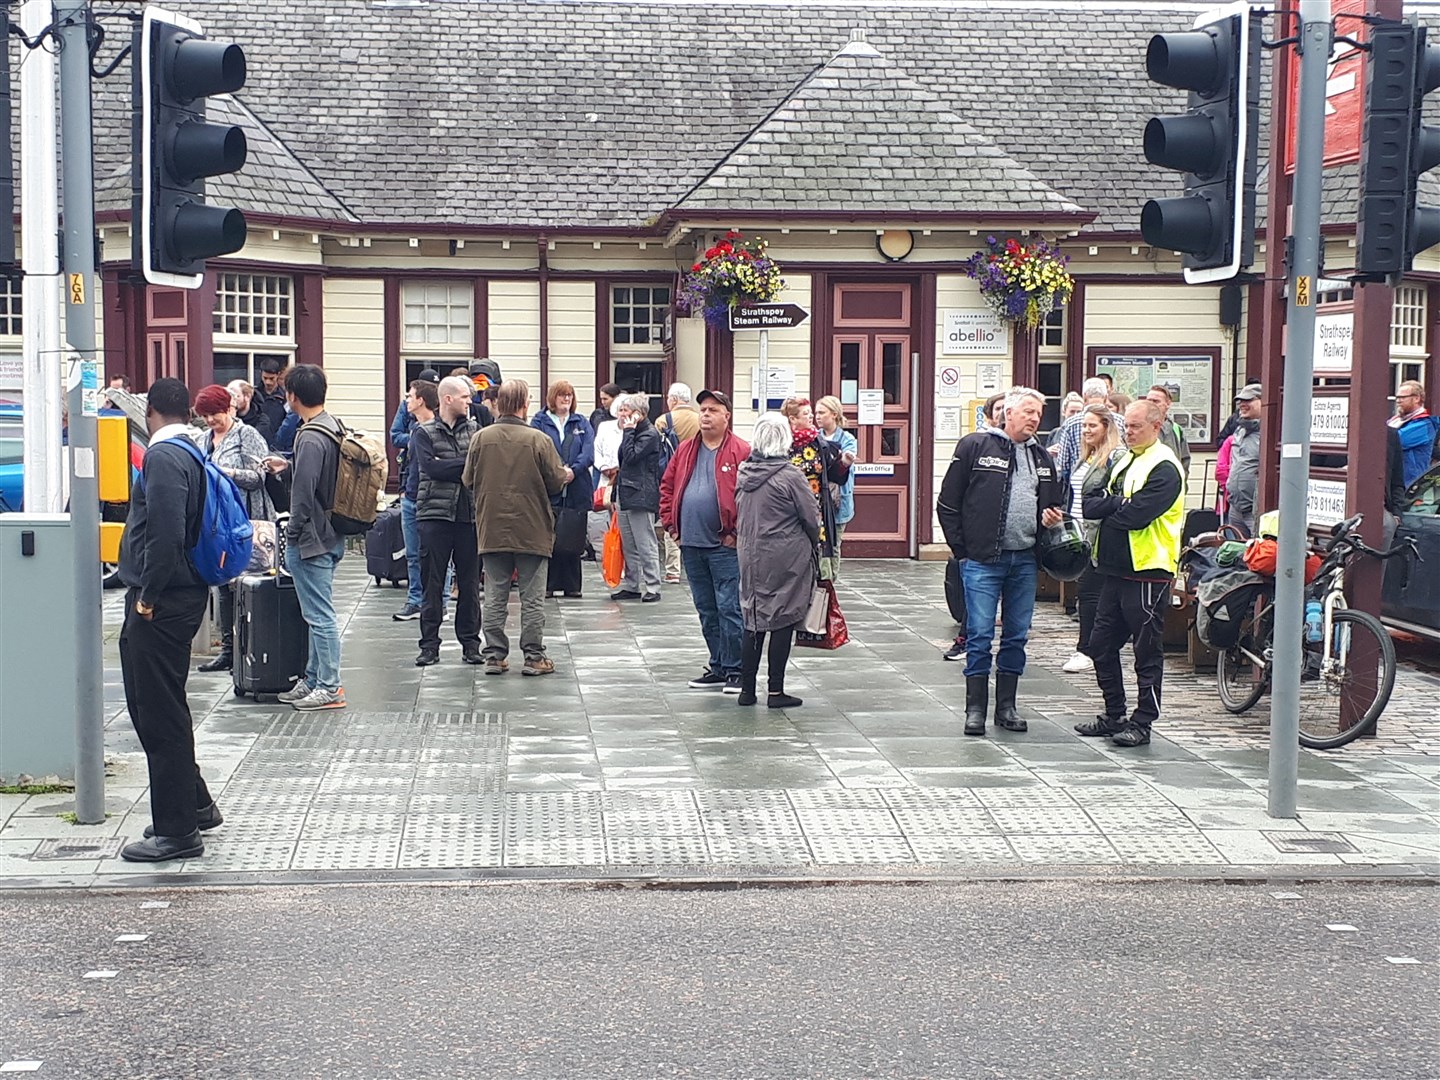 Another trainload of passengers waits at Aviemore for a bus